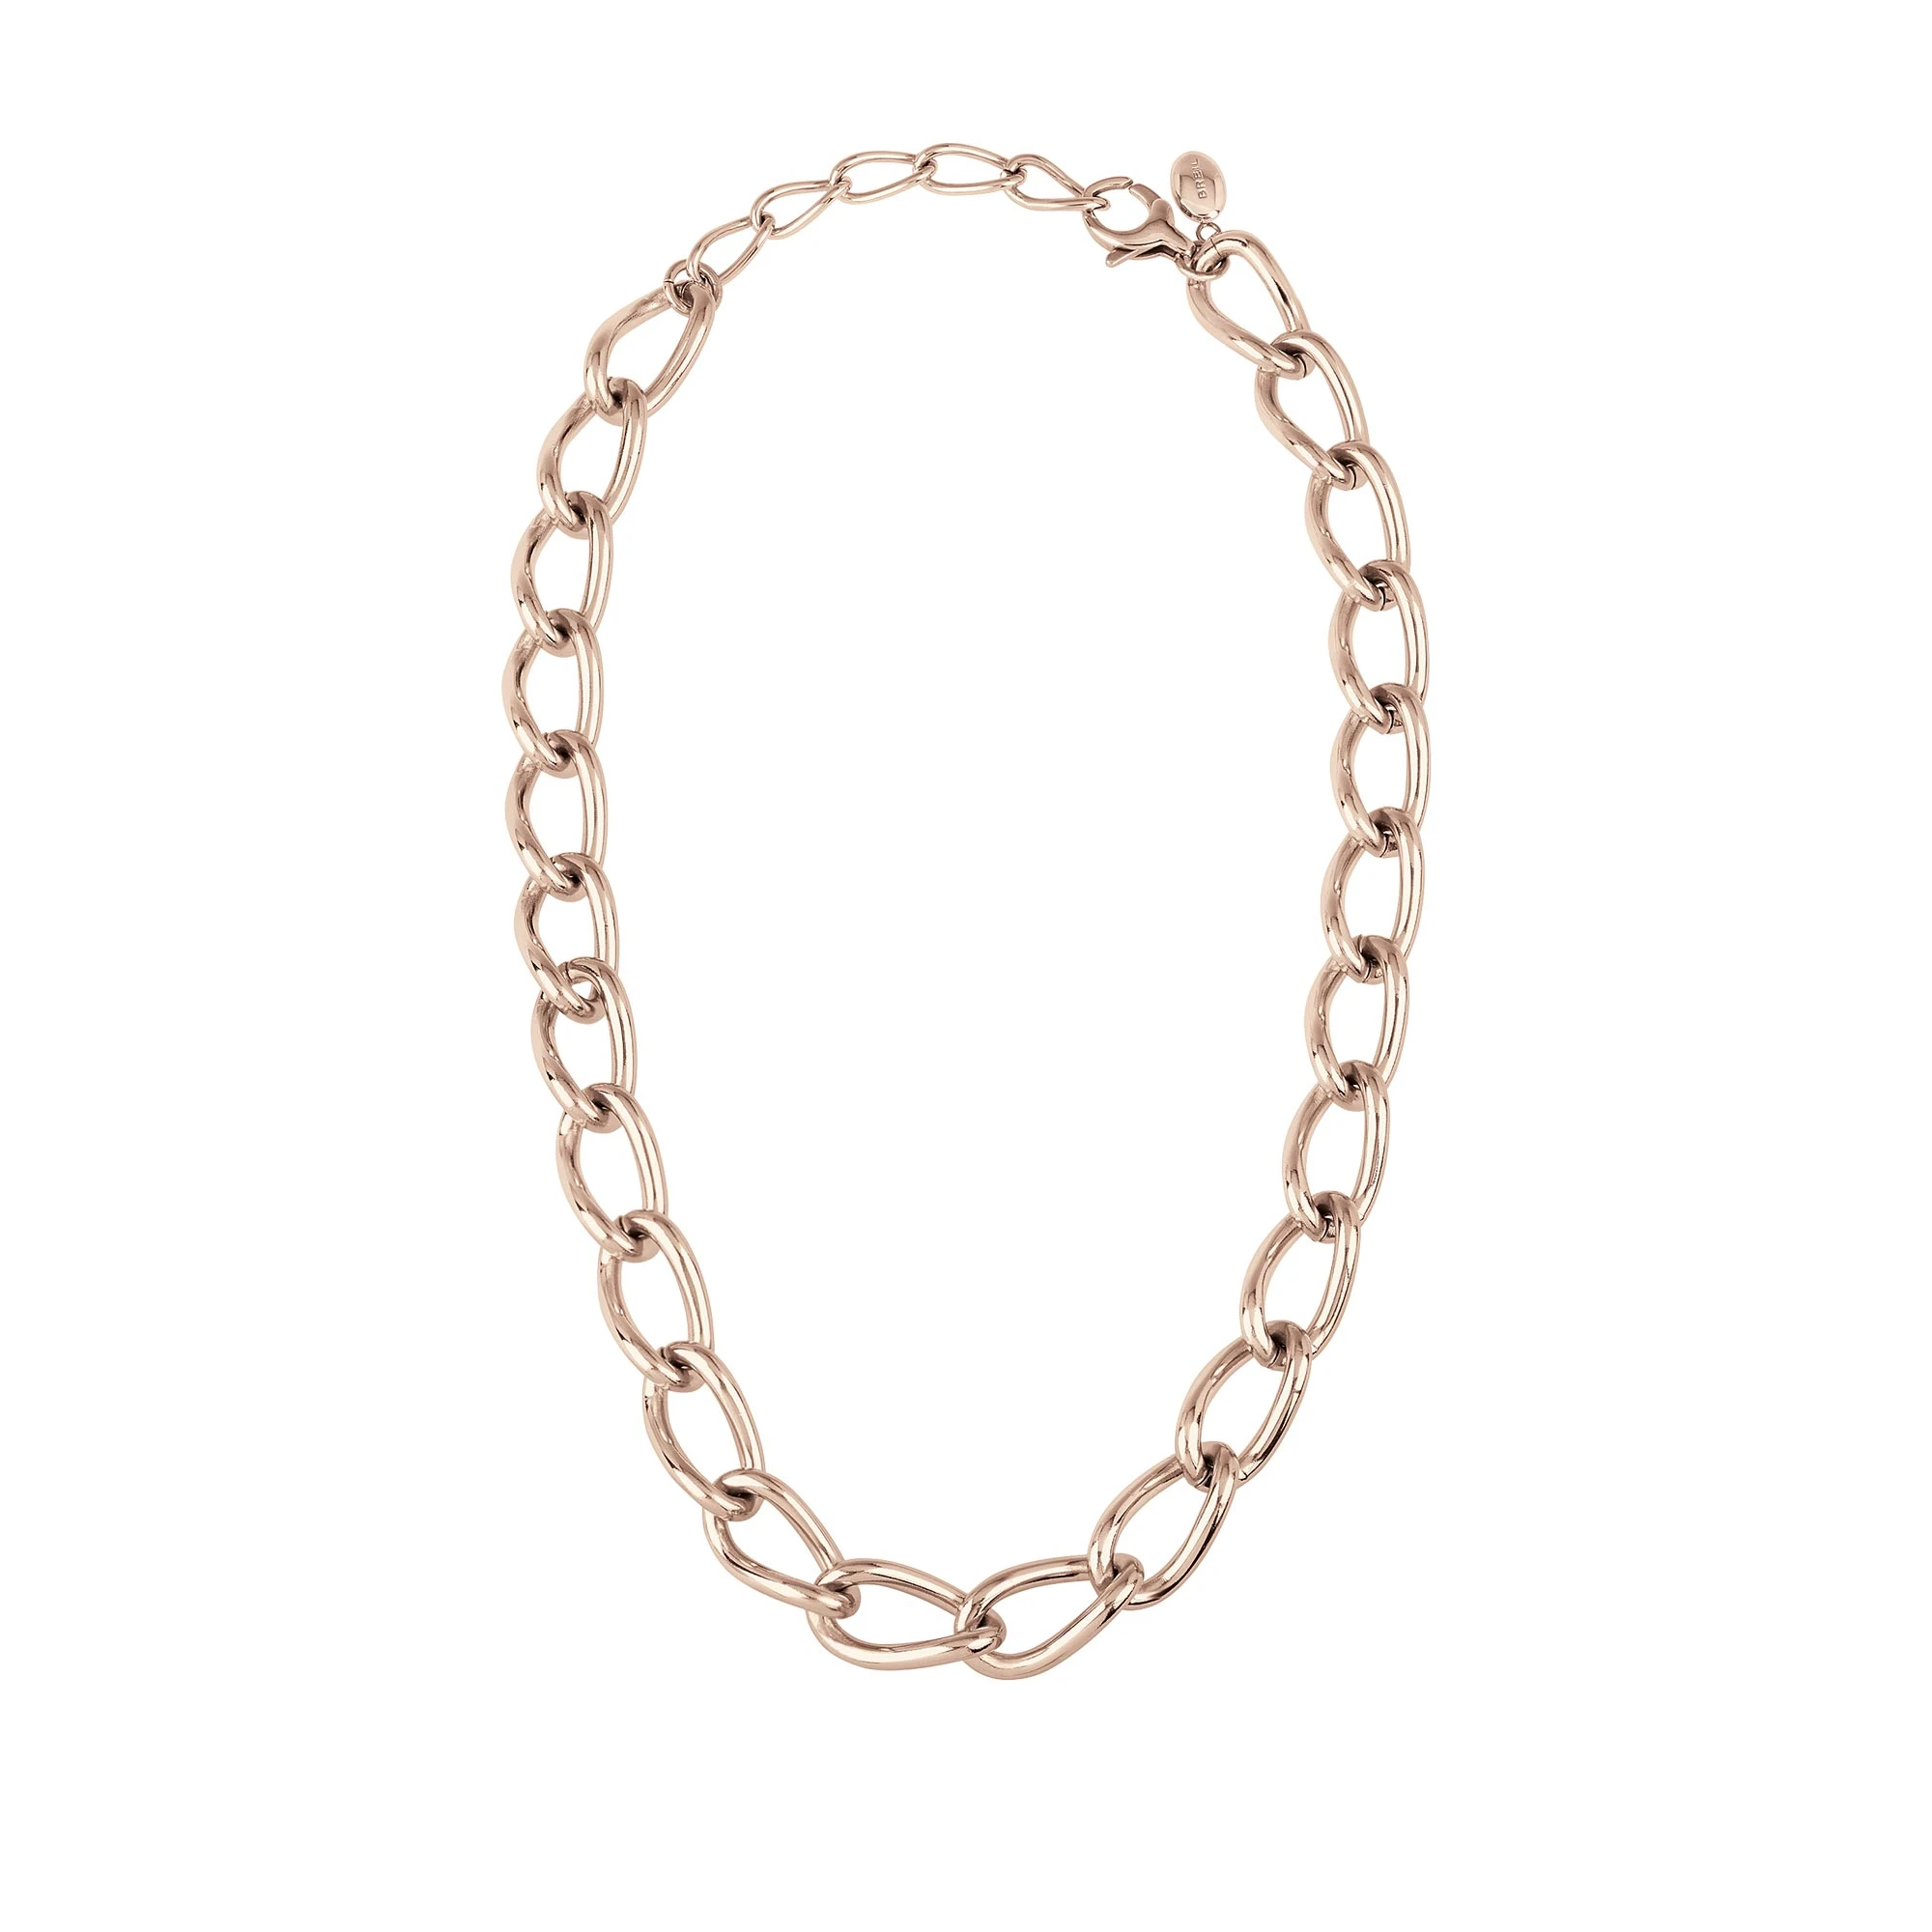 JOIN UP - COLLANA A CATENA IN ACCIAIO LUCIDO IP ROSE - 1 - TJ2921 | Breil